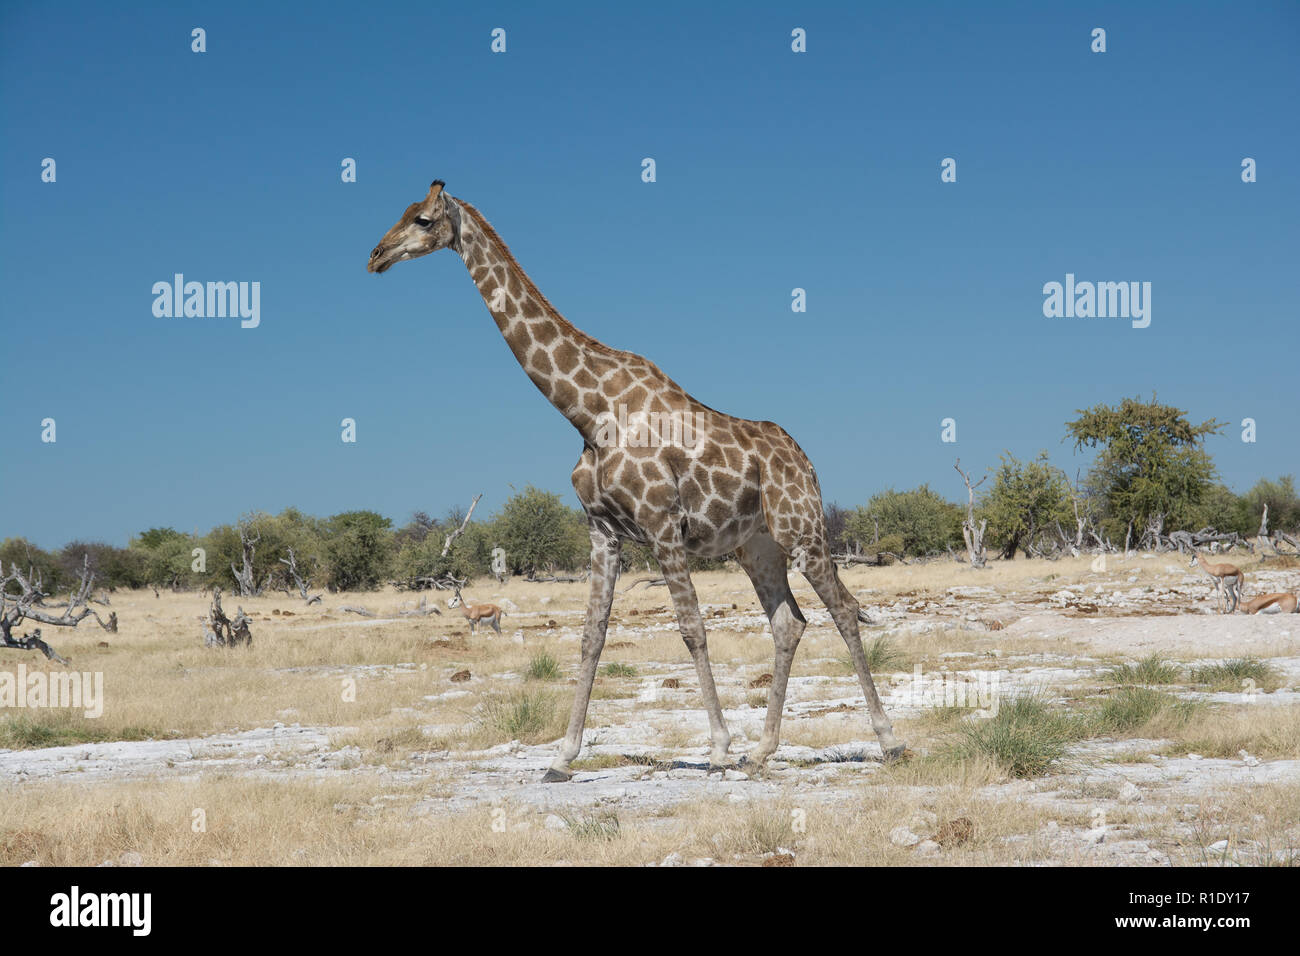 The picture of the giraffe was taken in Etosha national park close to Ombika waterhole Stock Photo